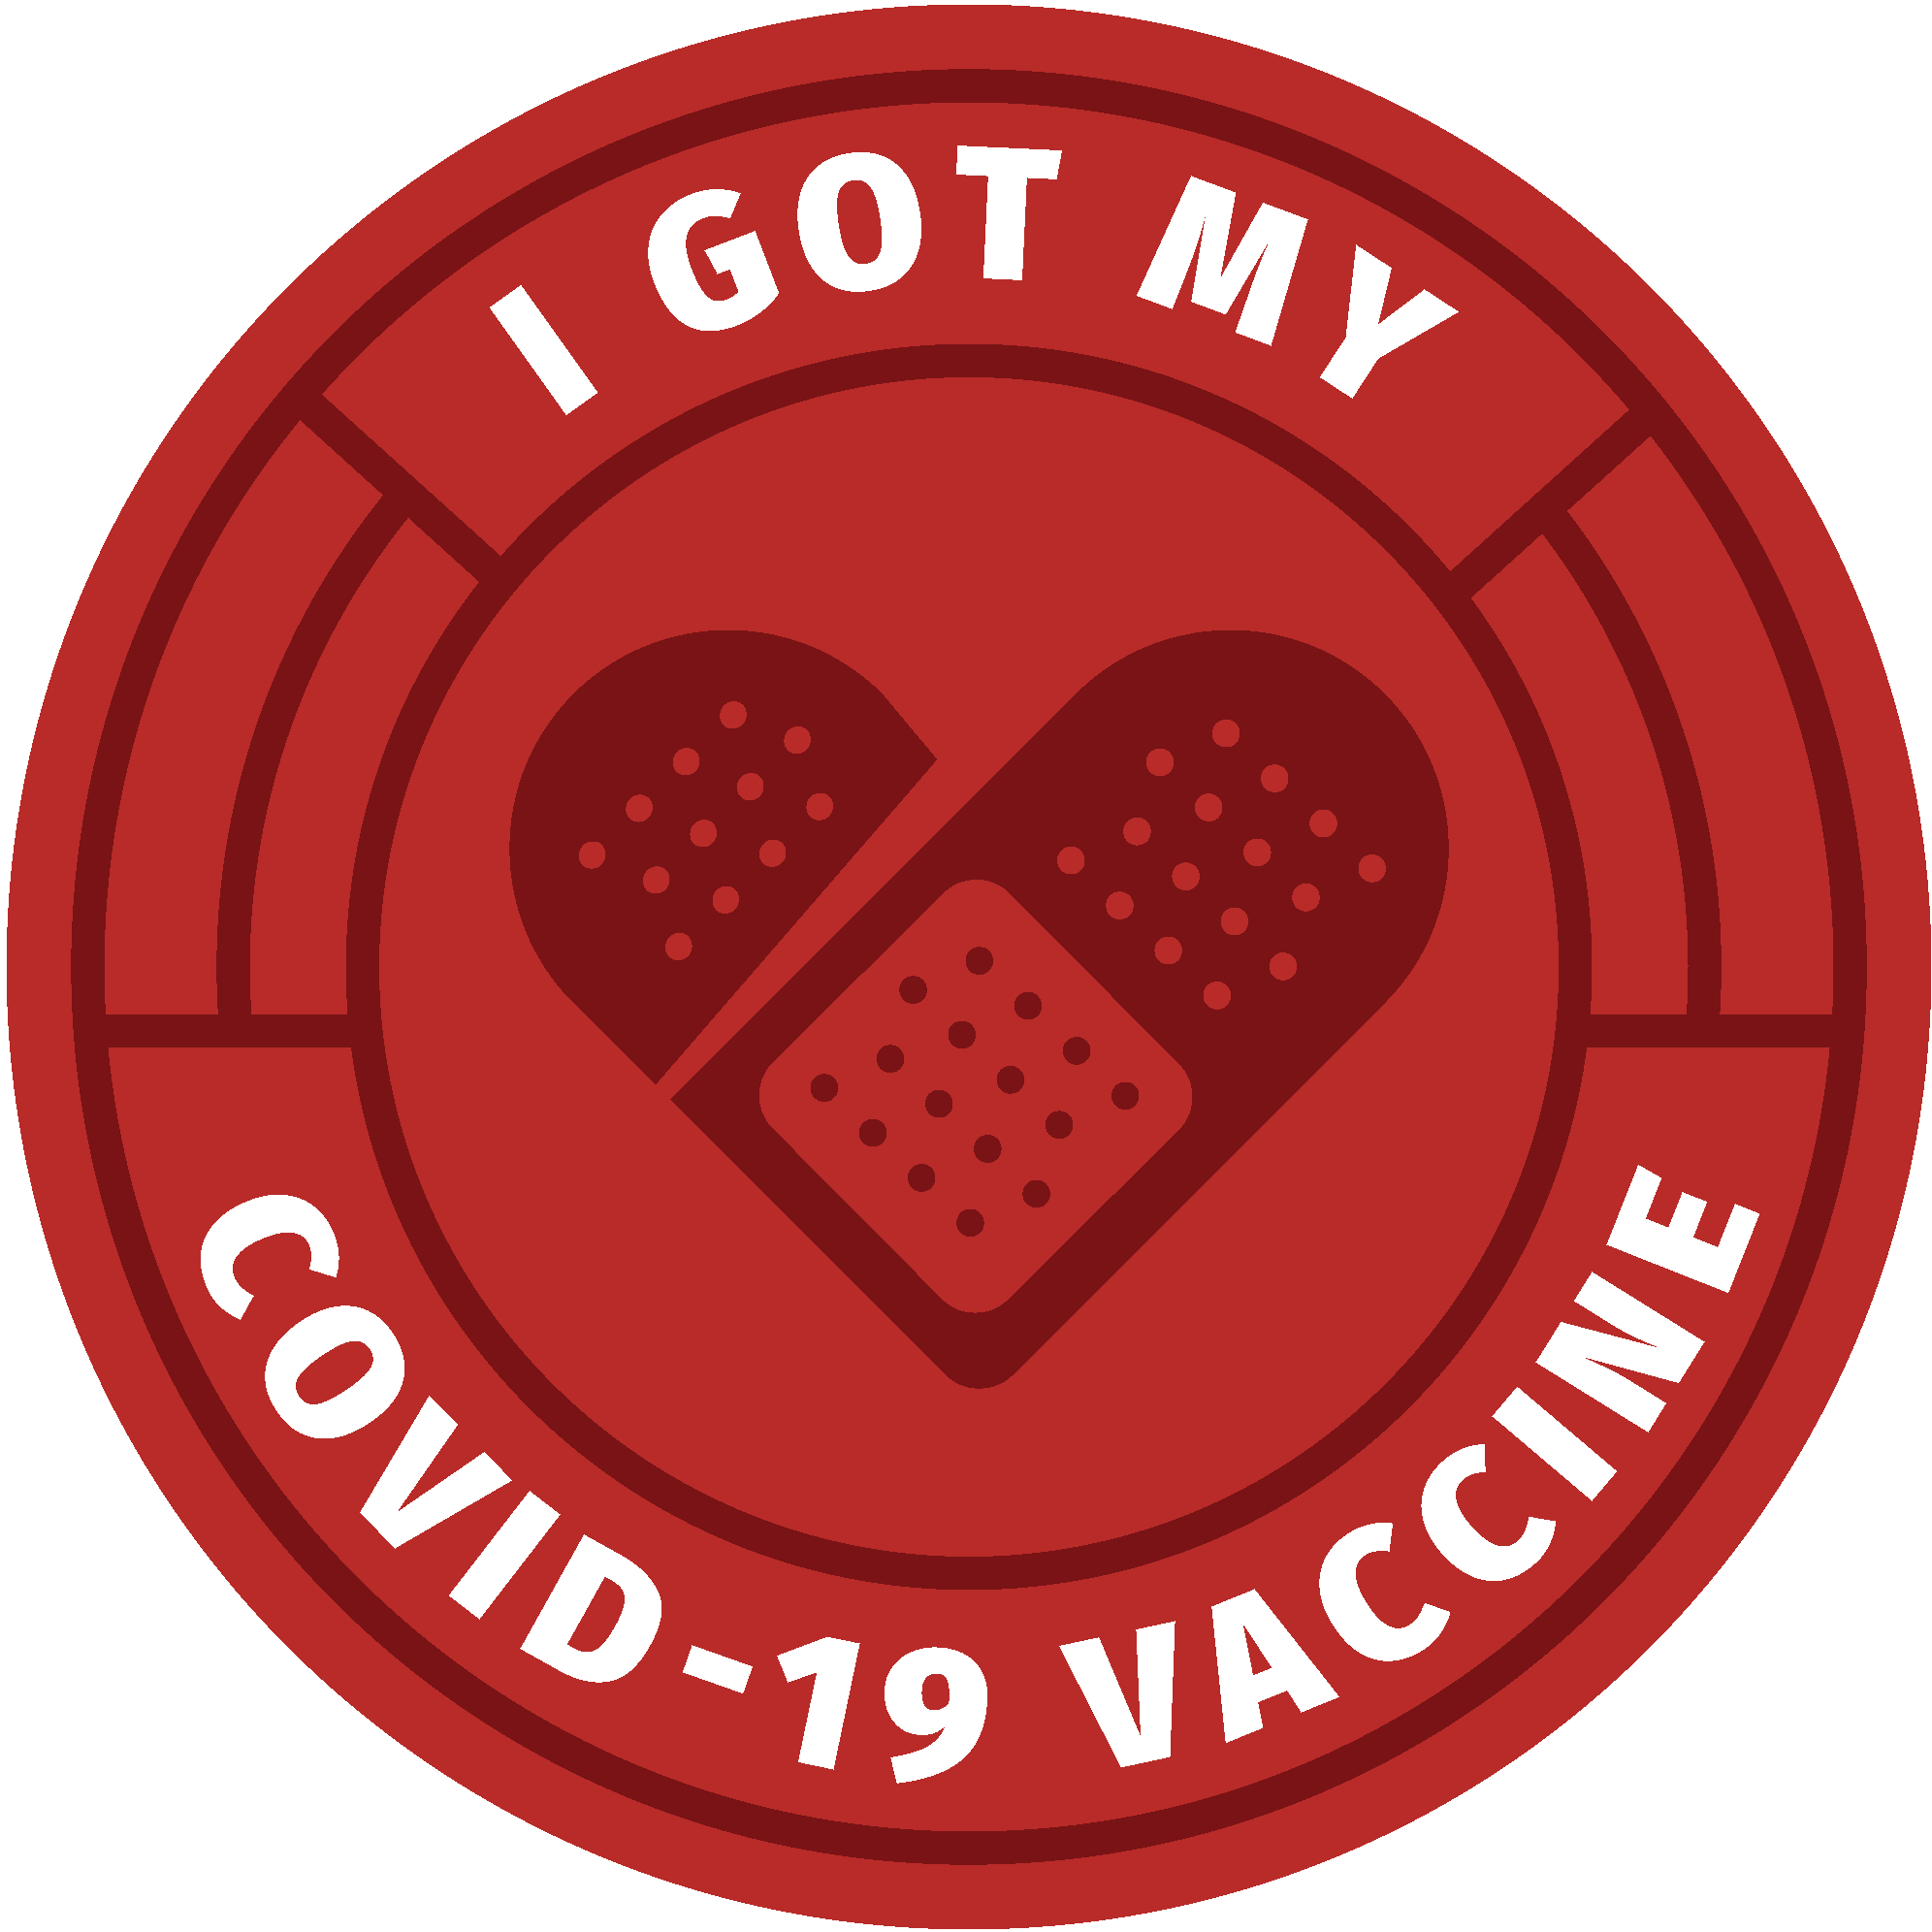 The CDC issues encouraging guidance for fully vaccinated individuals – AZ  Dept. of Health Services Director's Blog